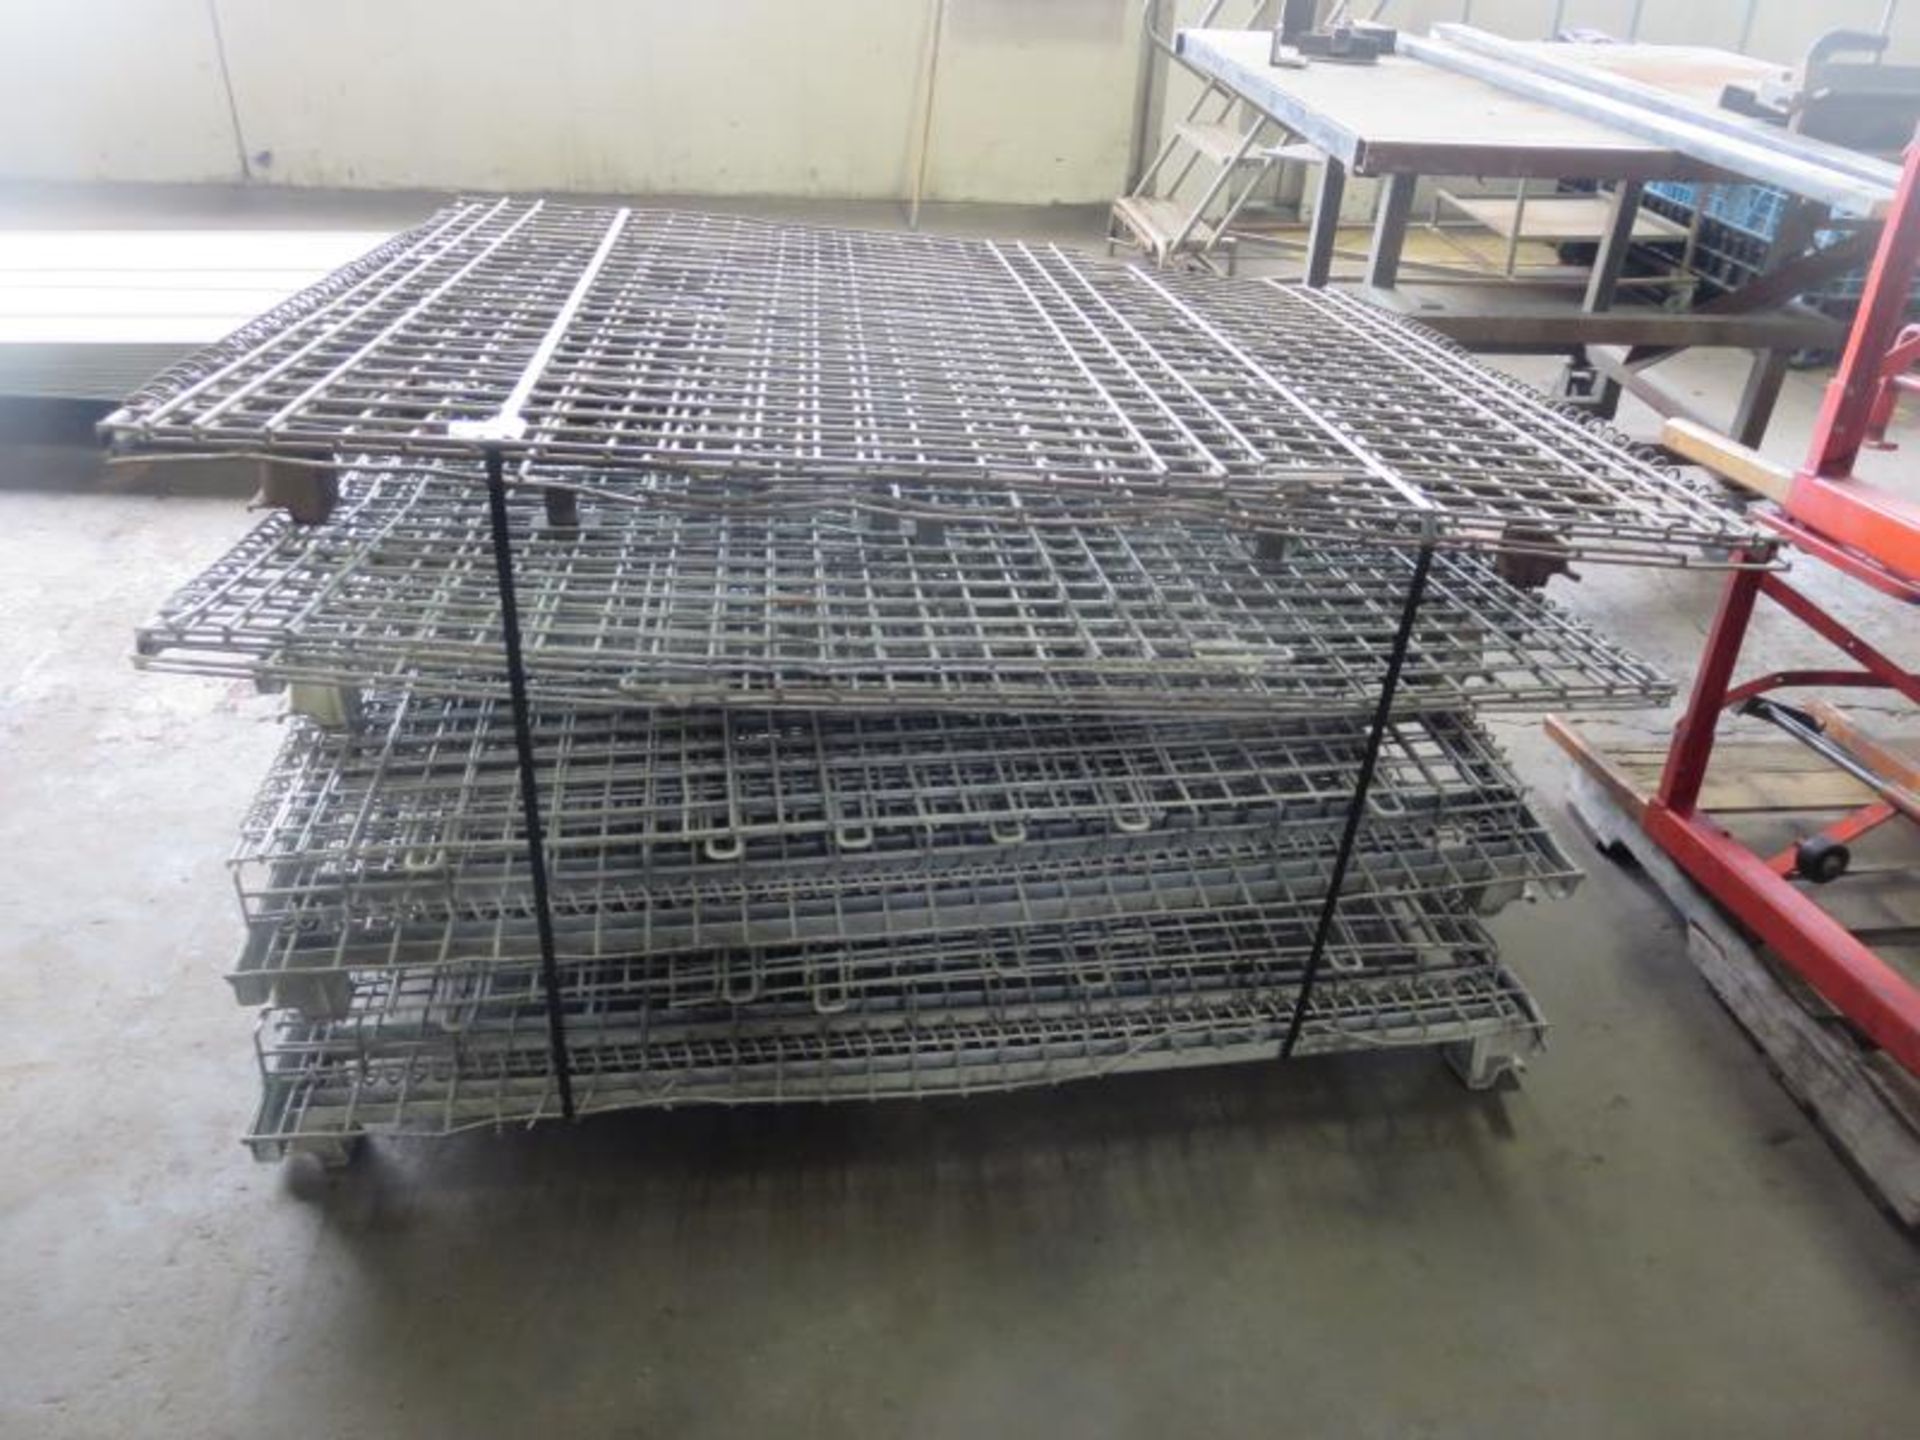 Lot (Qty 4) Wire Totes, approx 40" x 57" x 48"h. Hit # 2185775. M8-M9. Asset Located at 1425 S.